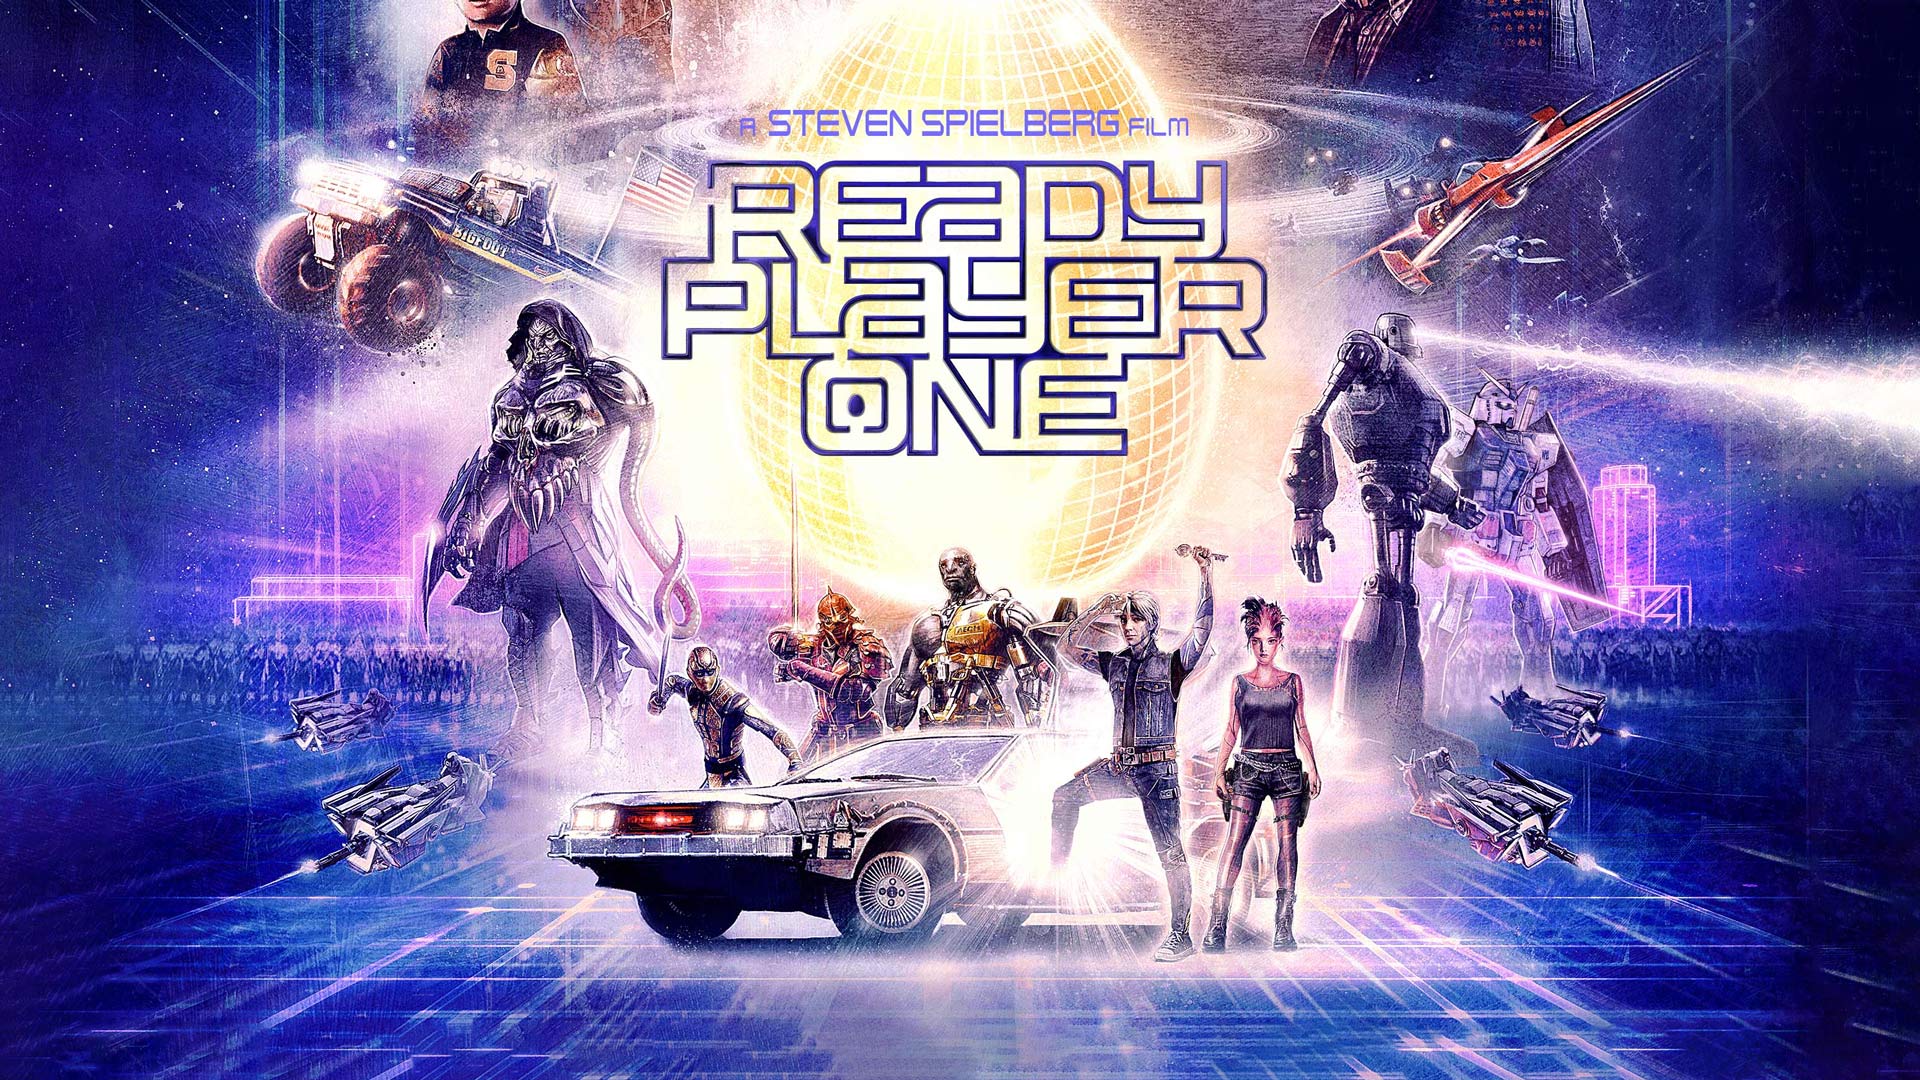 READY PLAYER ONE, SDCC Teaser